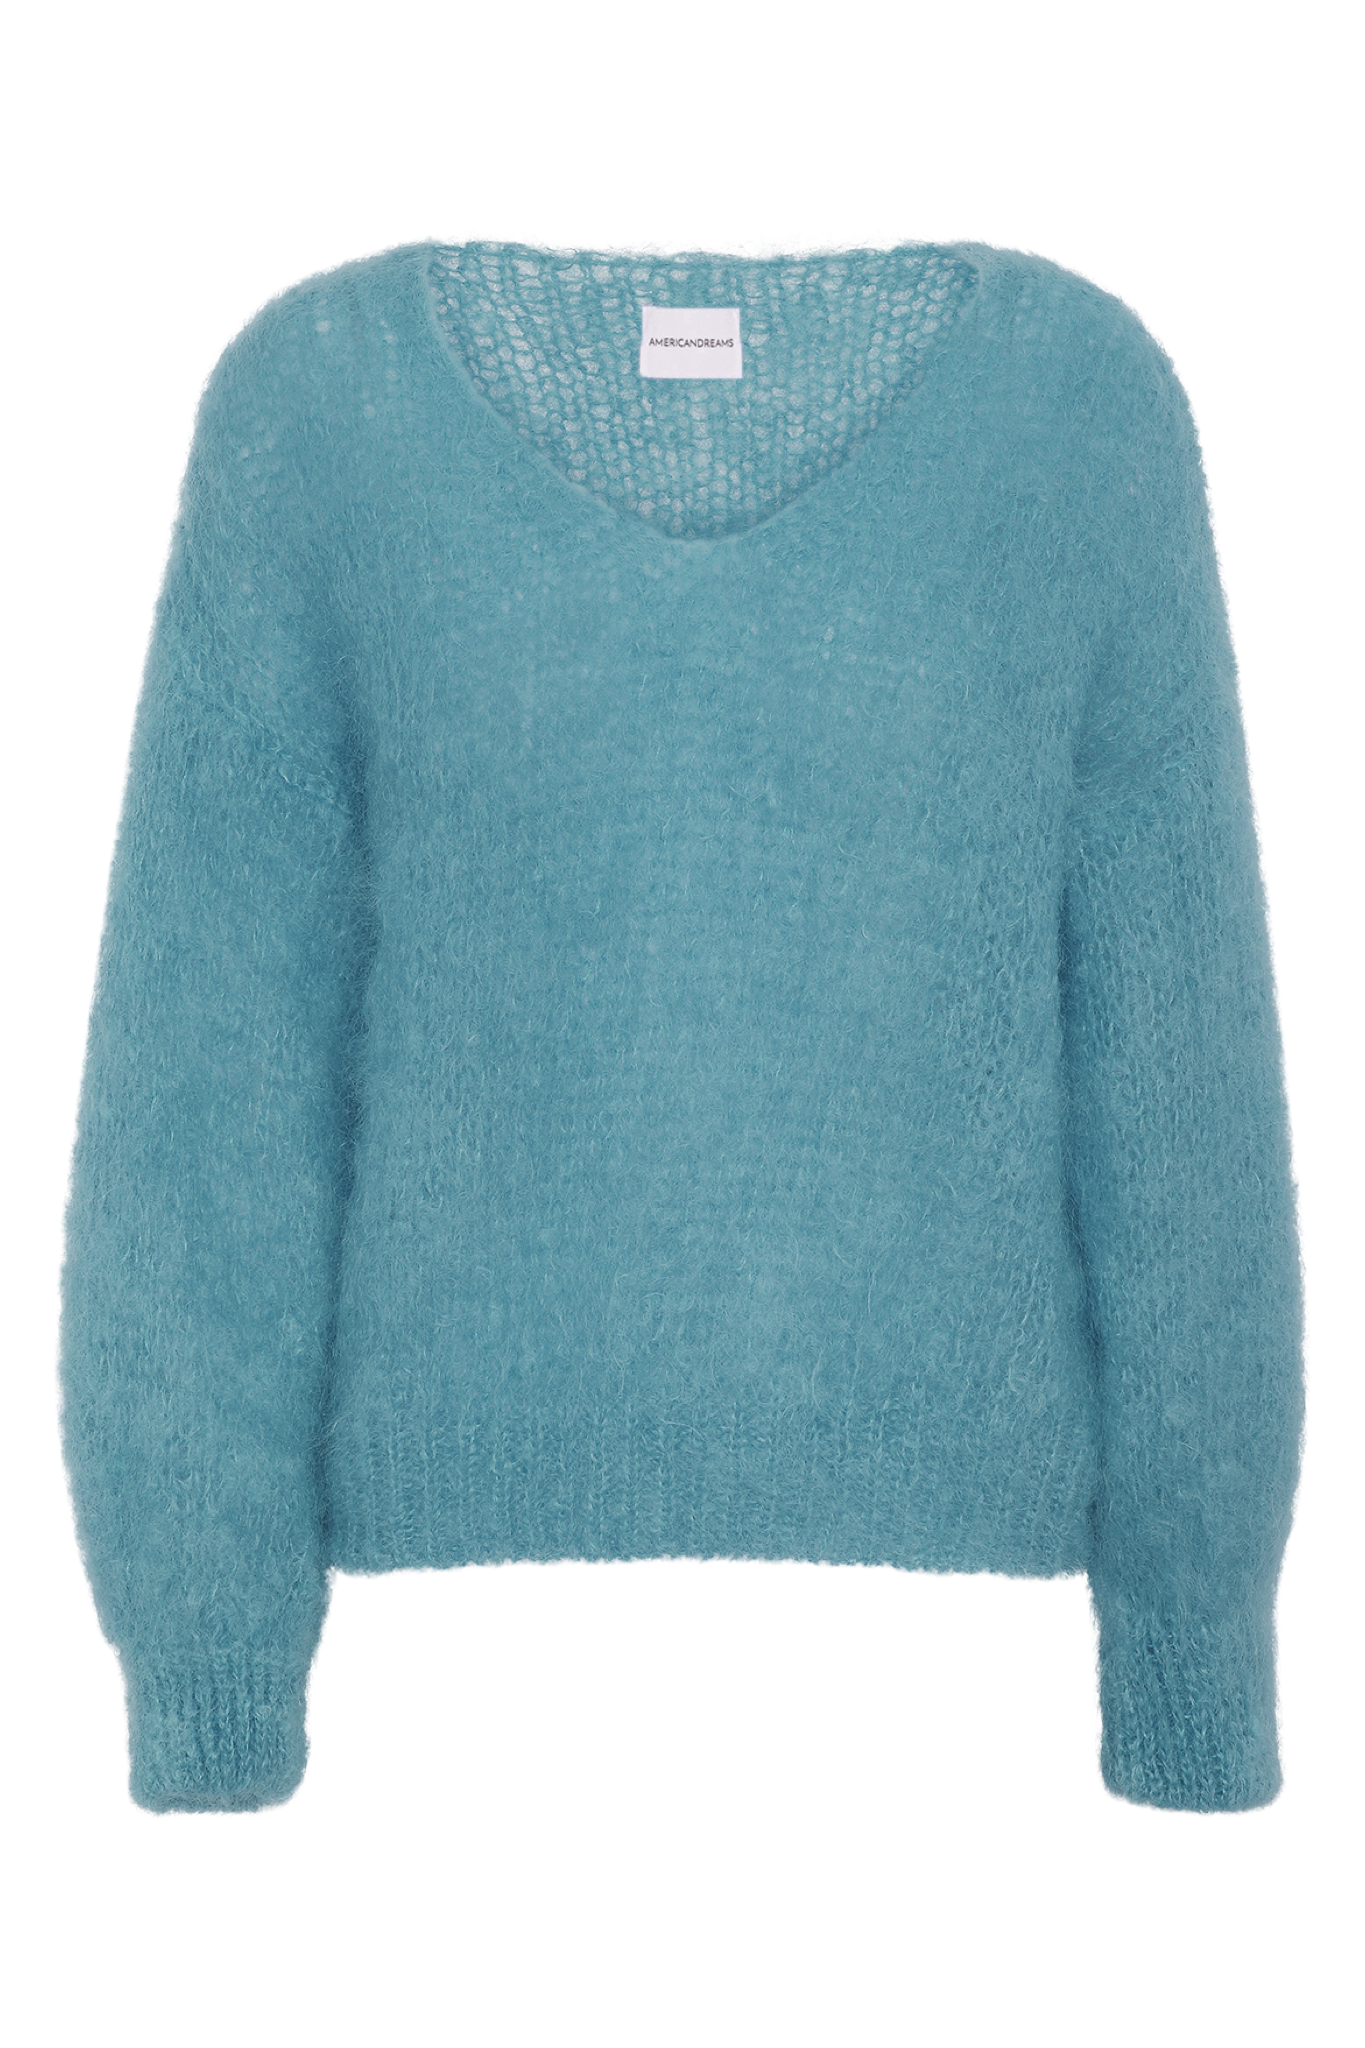 Milana LS Mohair Knit Turquoise